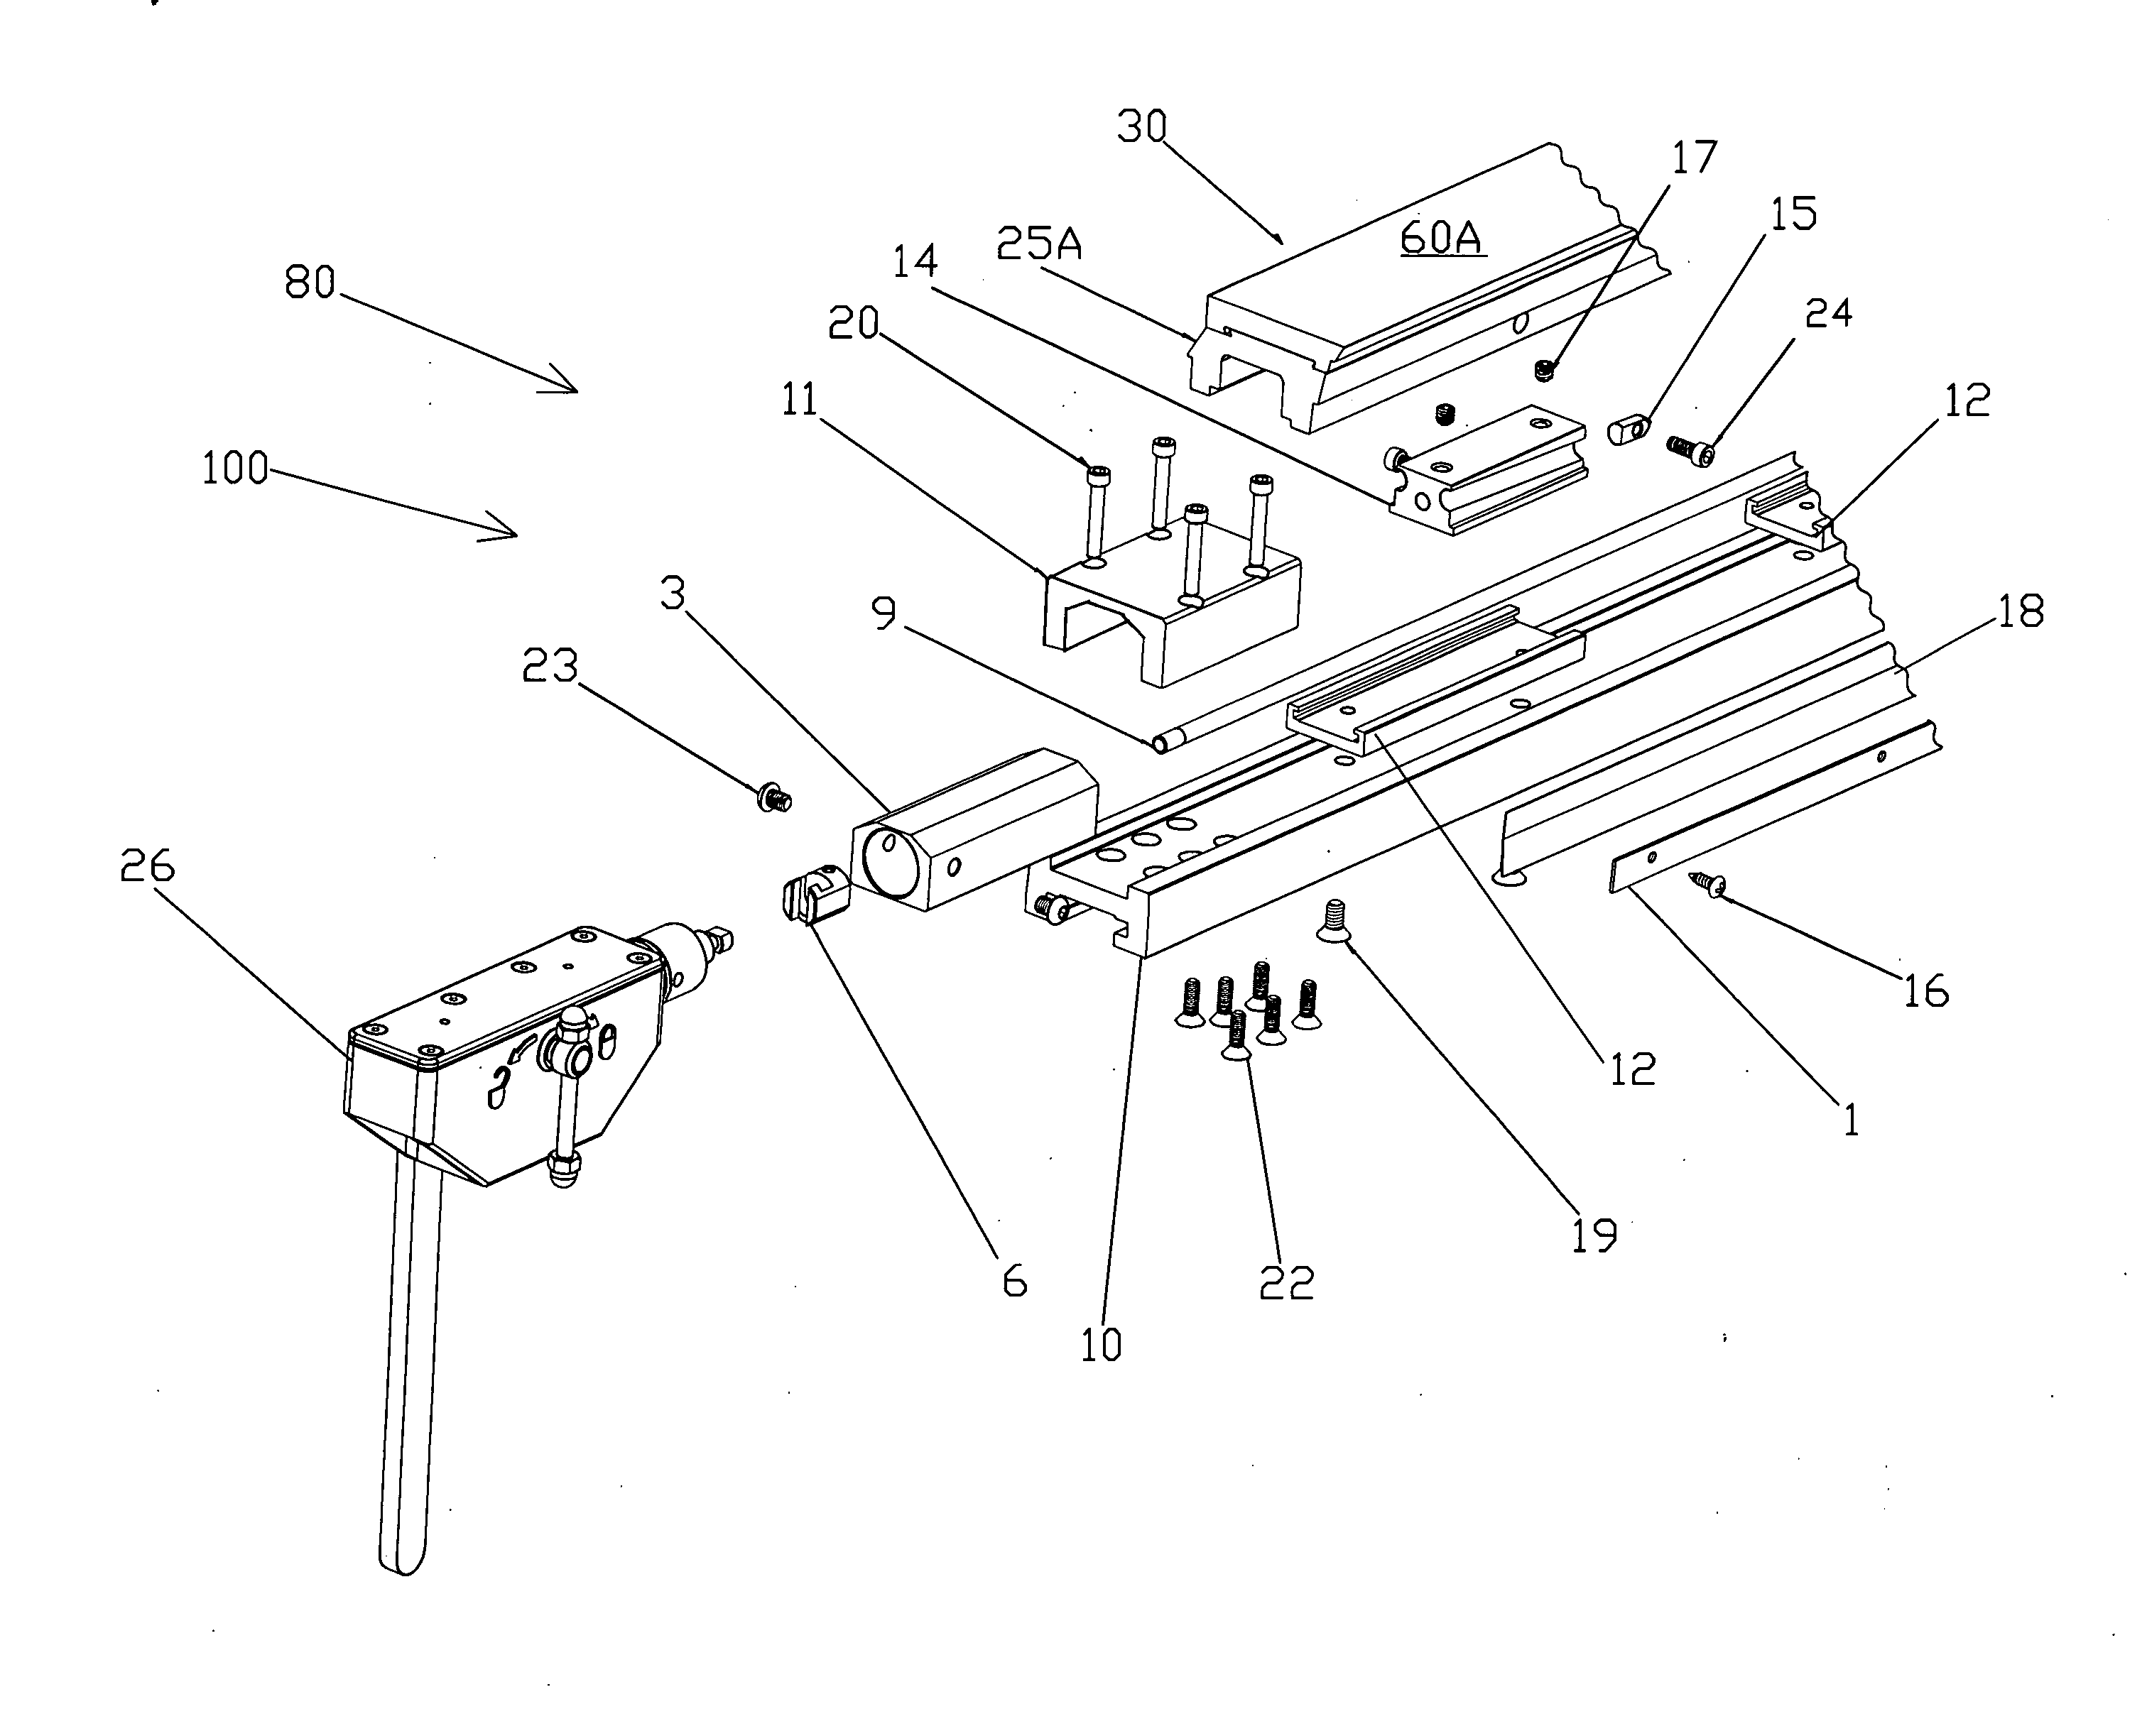 Angle and height control mechanisms in fourdrinier forming processes and machines